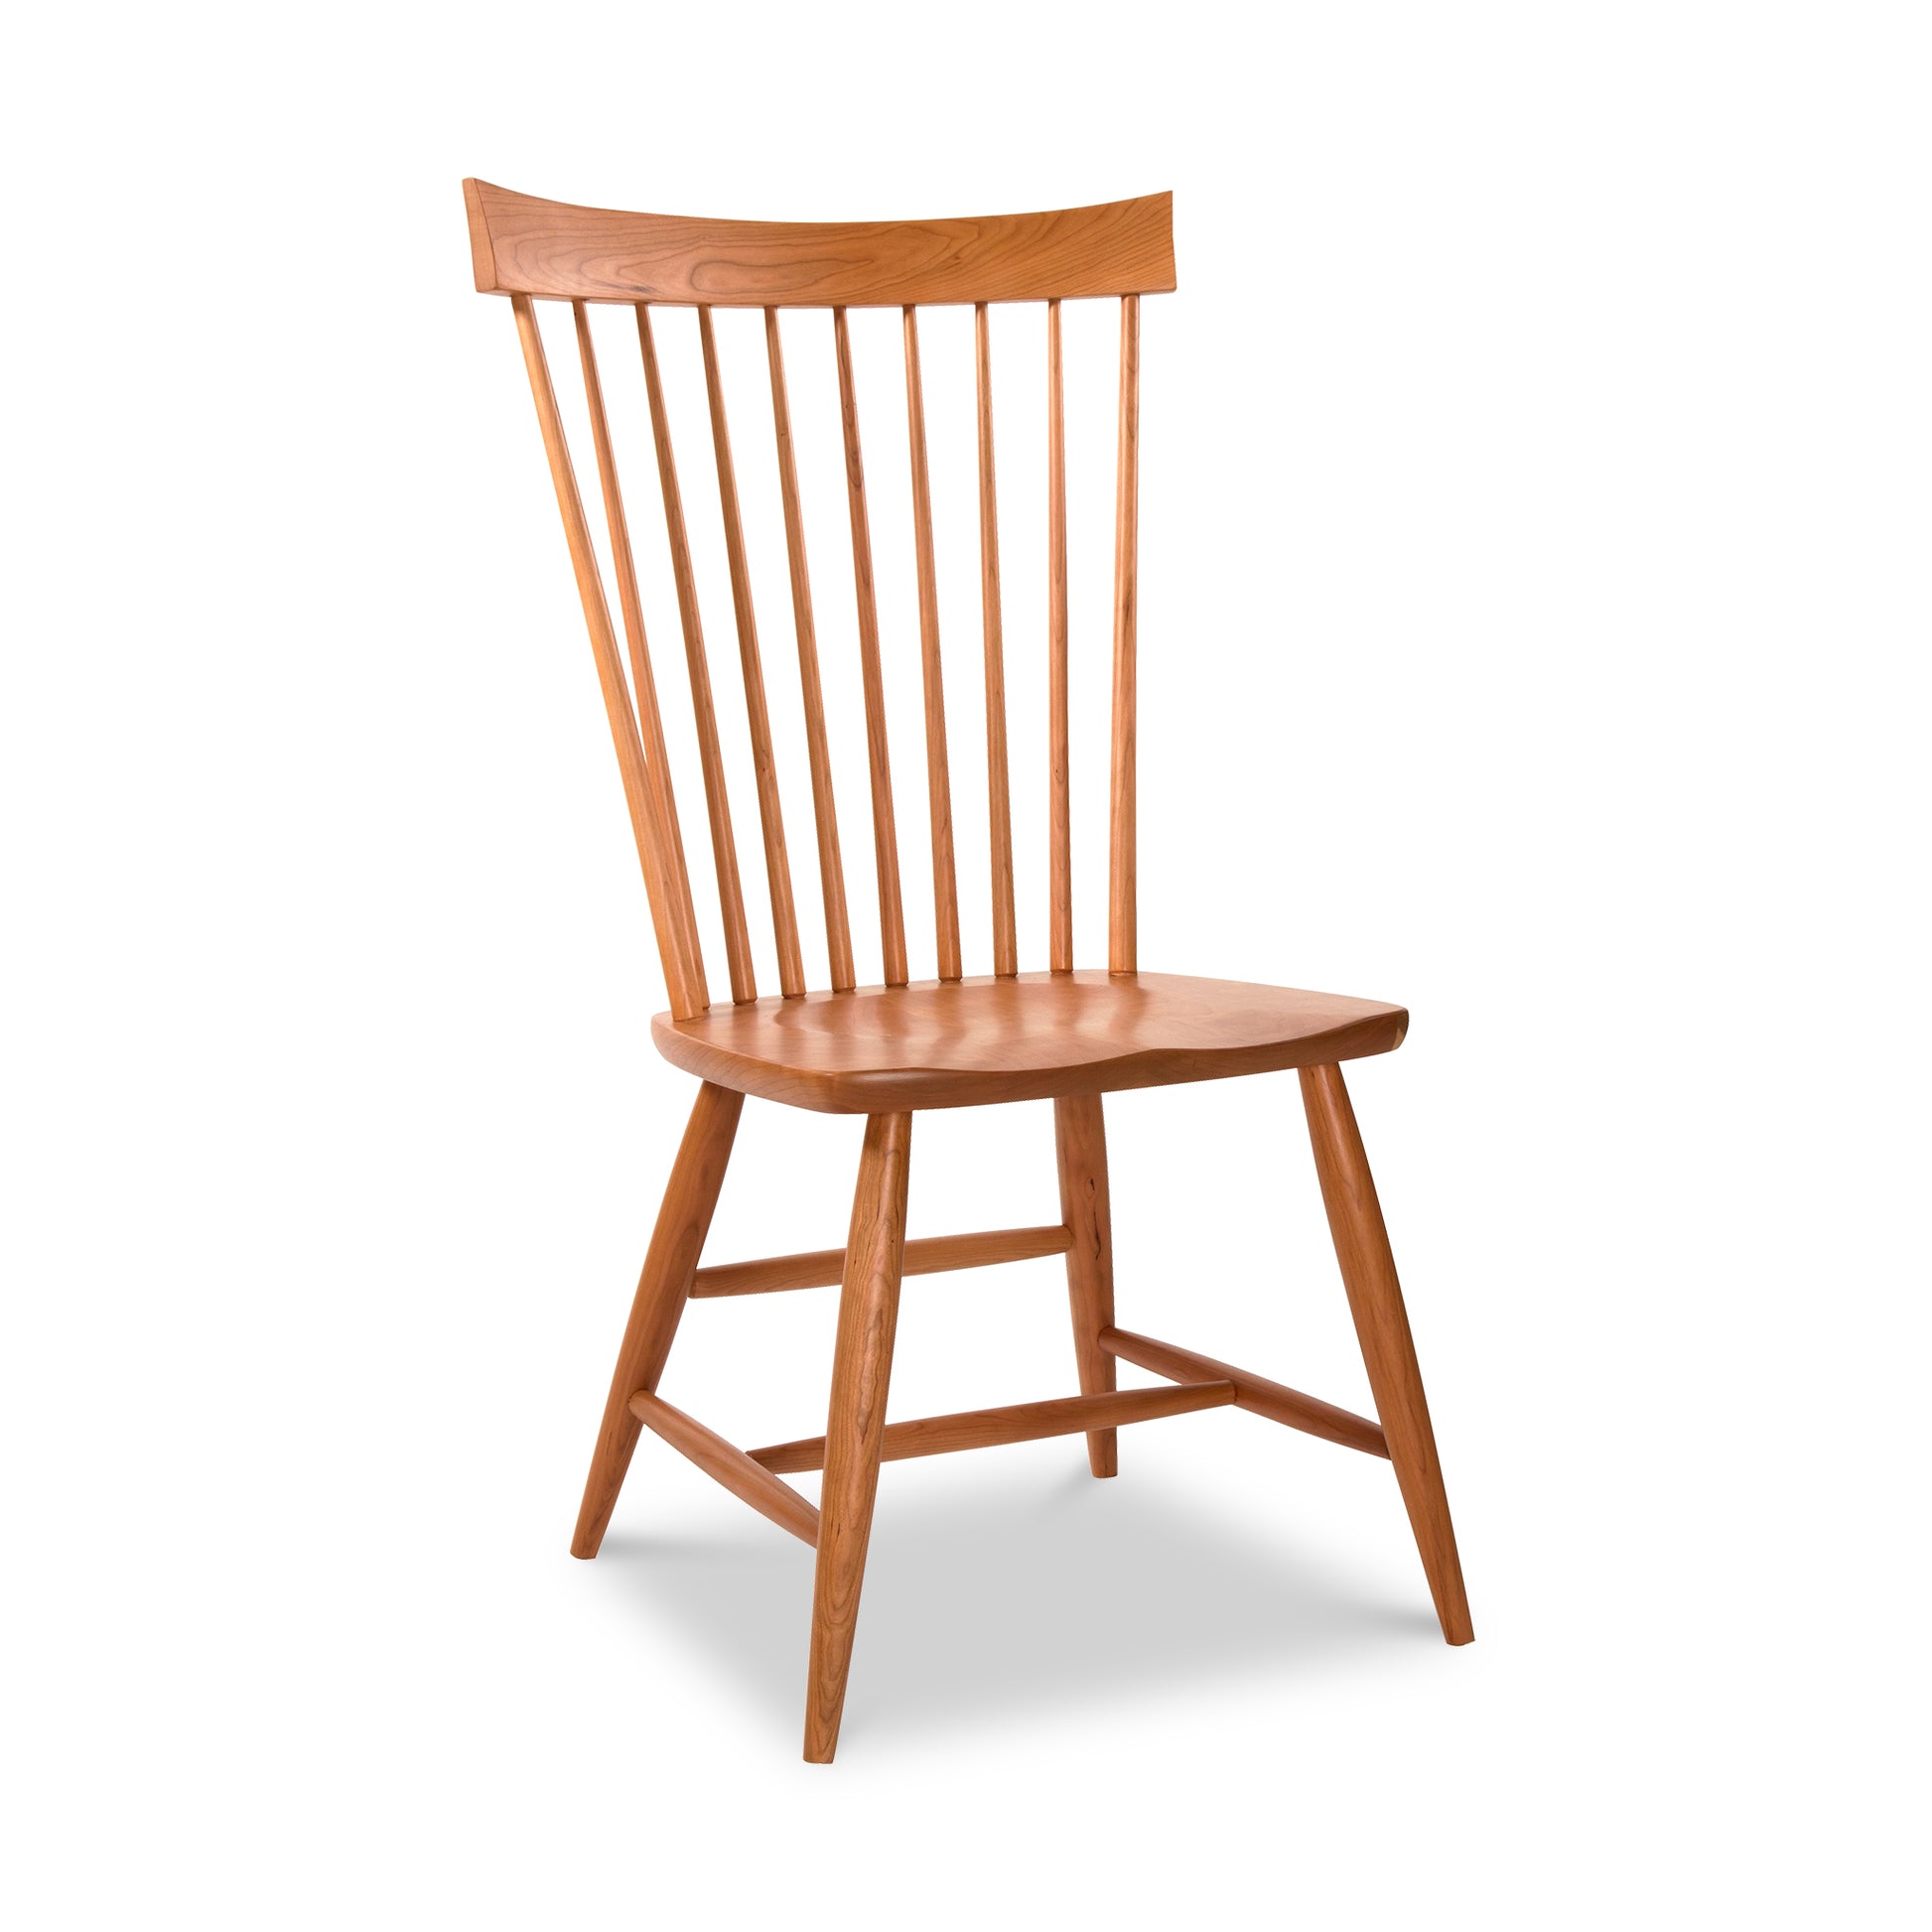 A high-end Country Windsor Chair by Lyndon Furniture with a contemporary flair and a wooden seat.